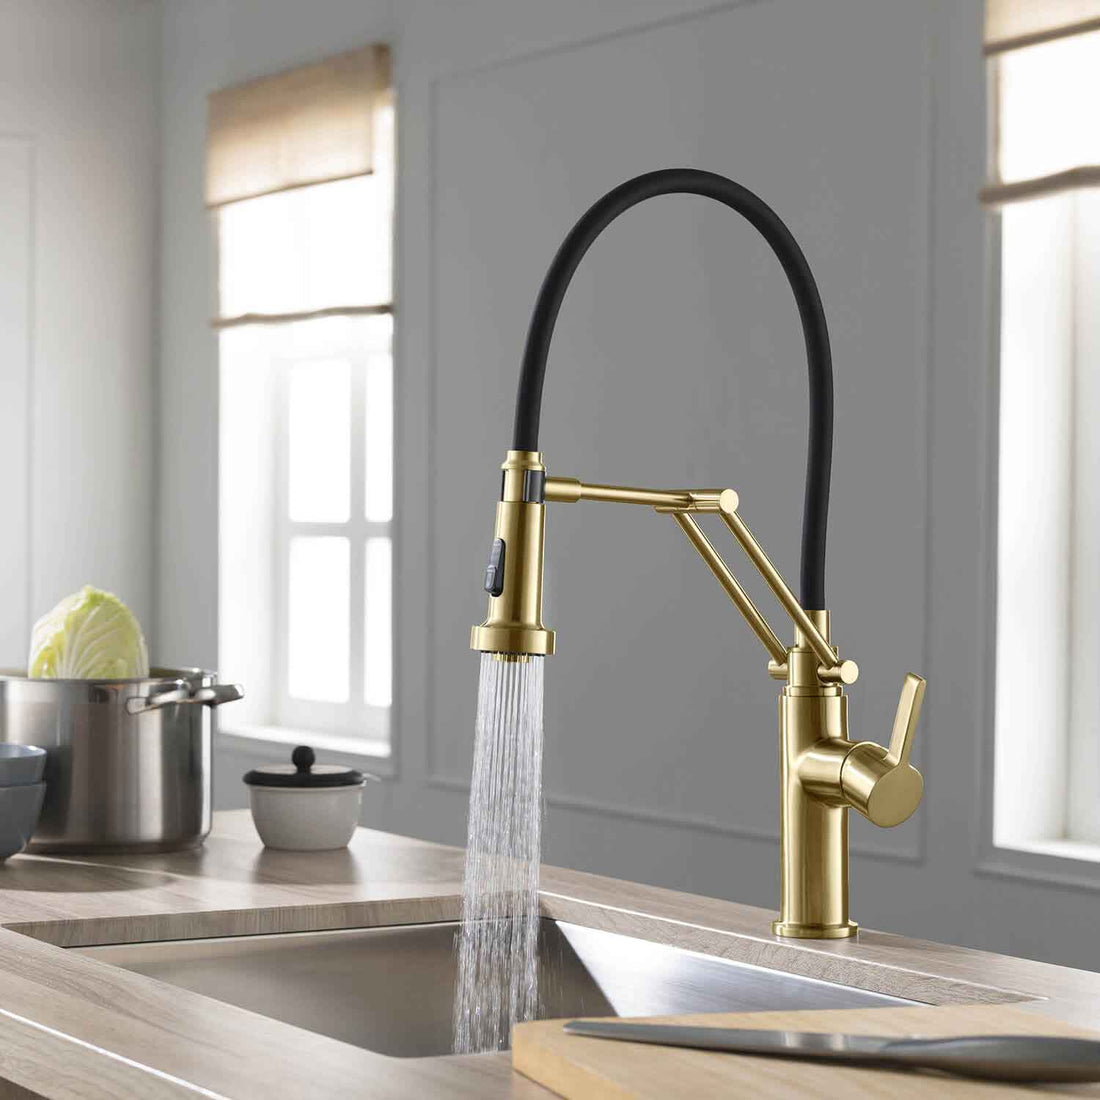 How to replace kitchen faucet with a better one